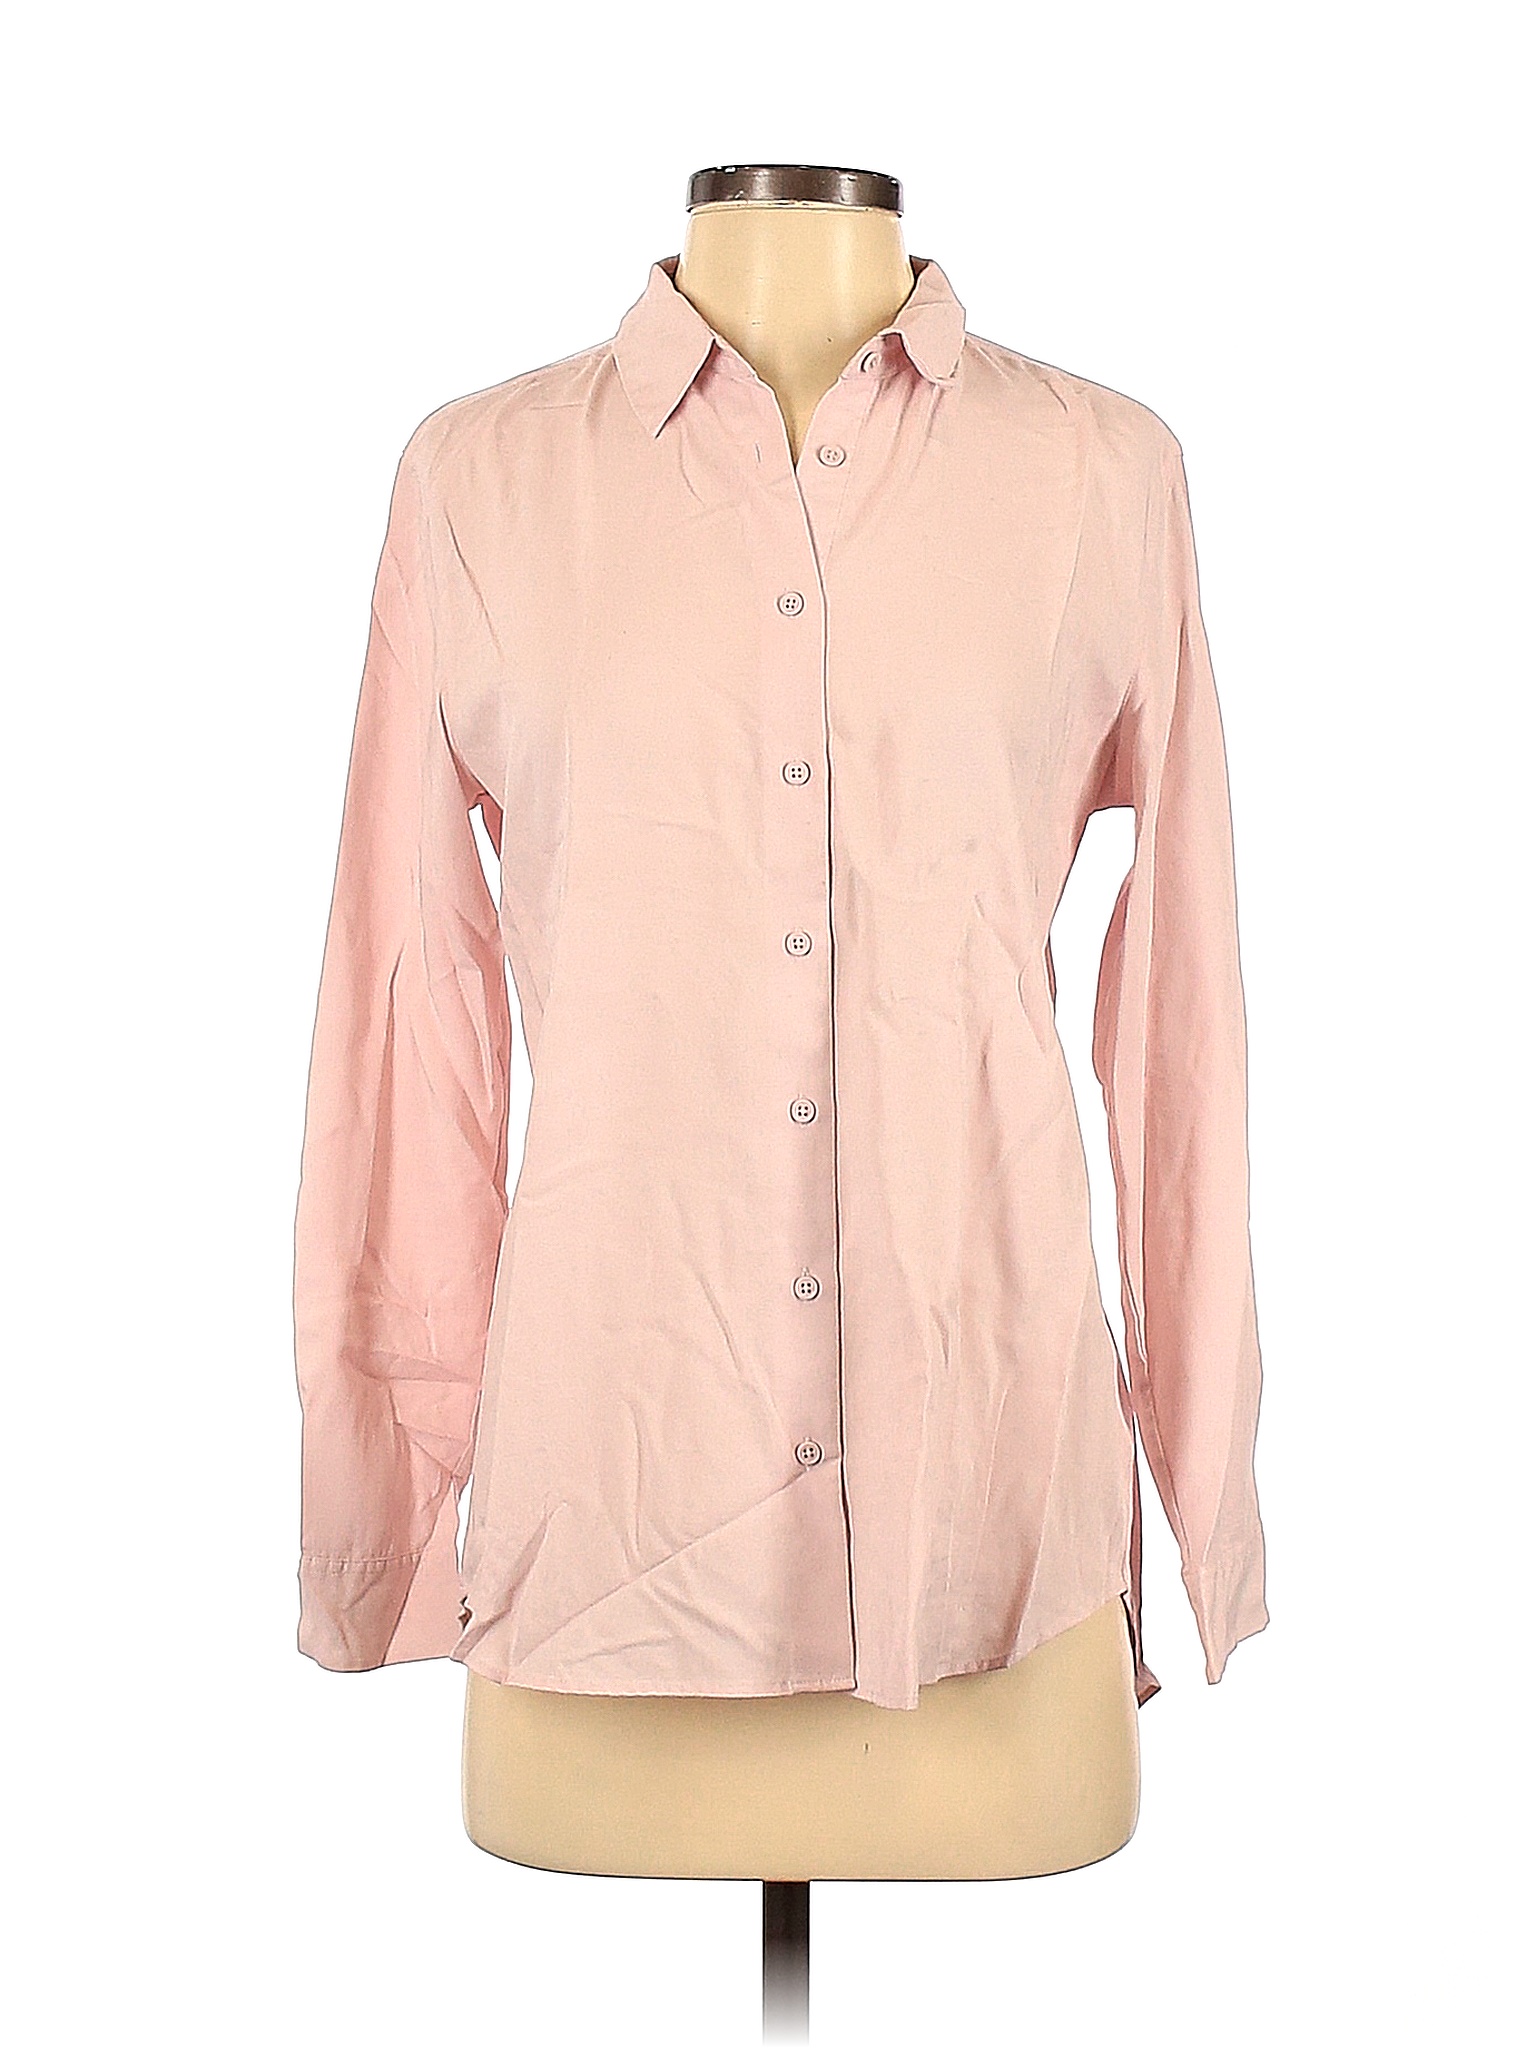 Uniqlo Colored Pink Long Sleeve Button-Down Shirt Size S - 75% off ...